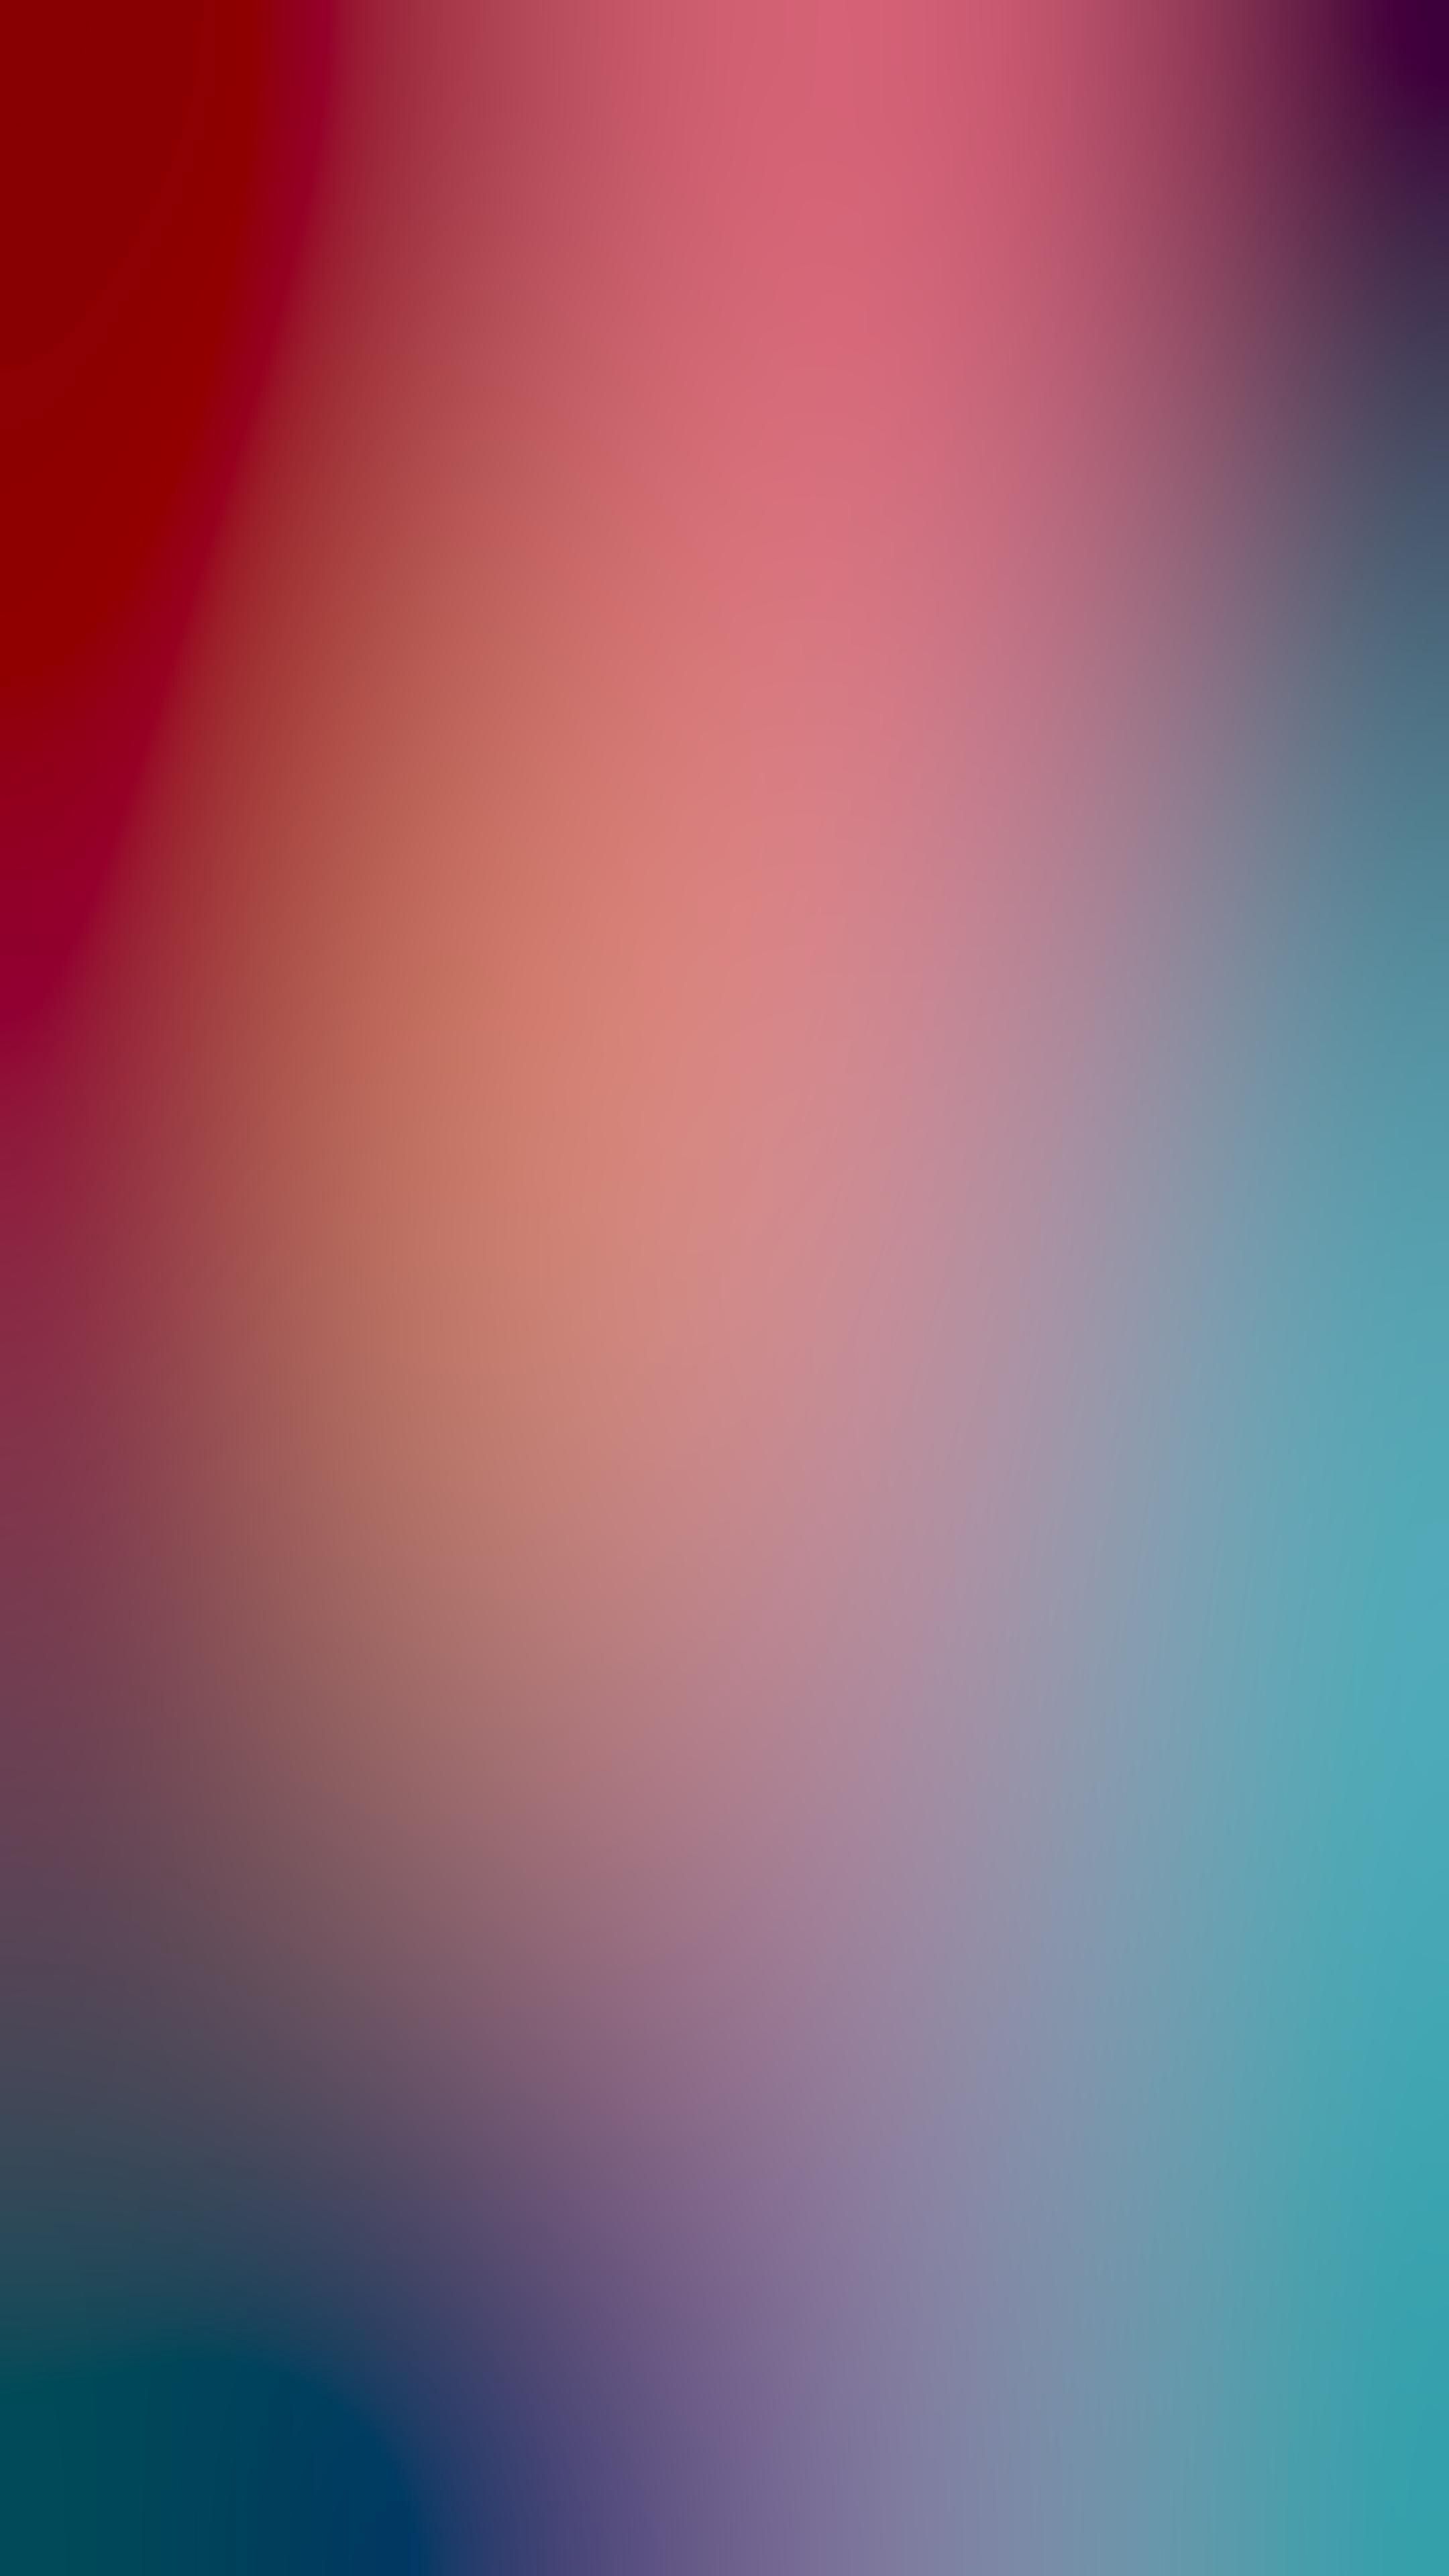 146777 download wallpaper gradient, abstract, multicolored, motley, blur, smooth screensavers and pictures for free